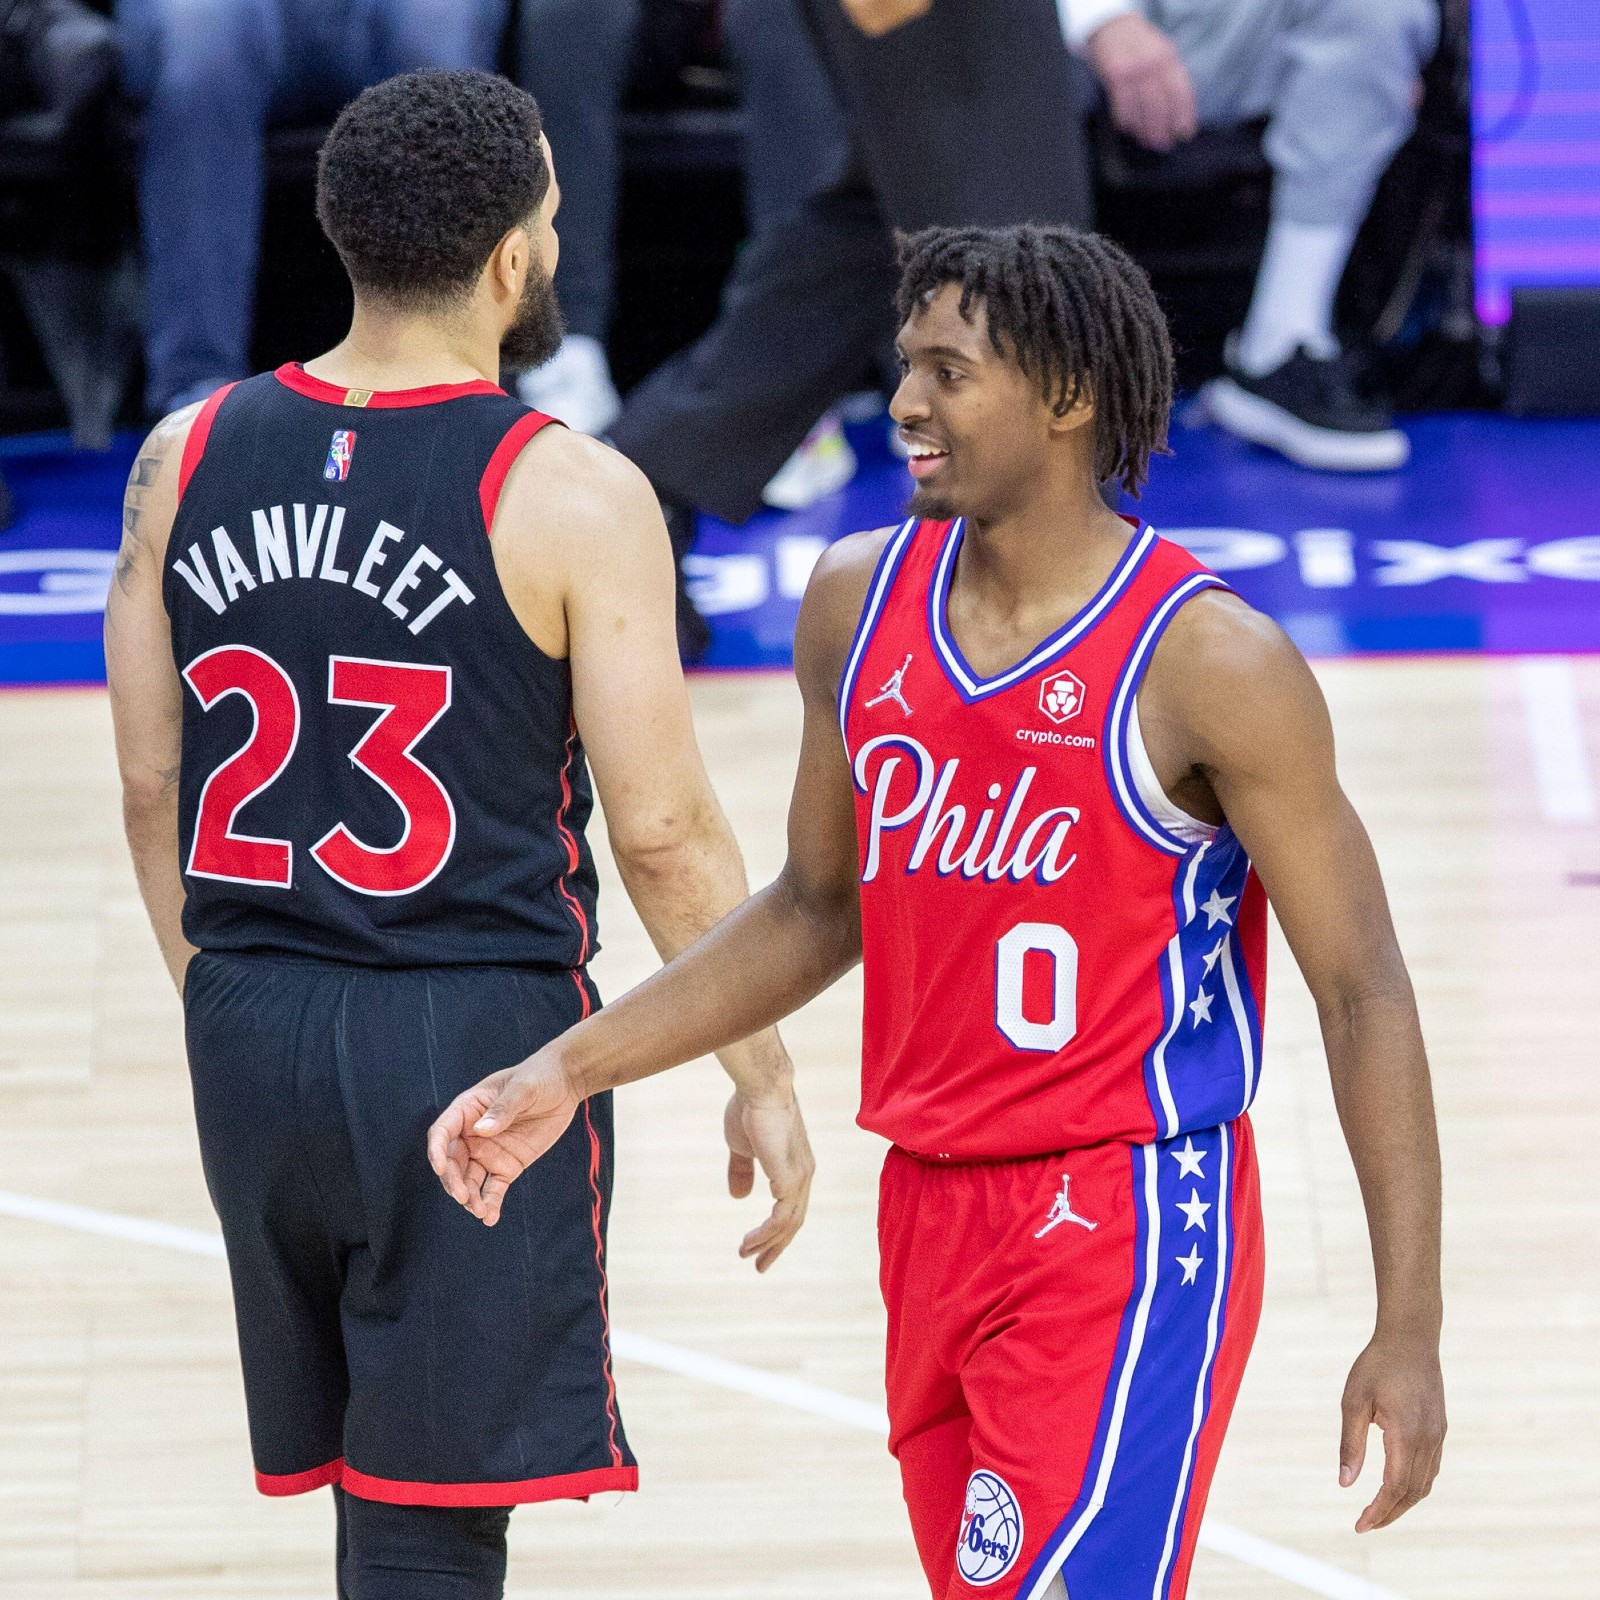 Raptors vs. 76ers live stream: TV channel, how to watch